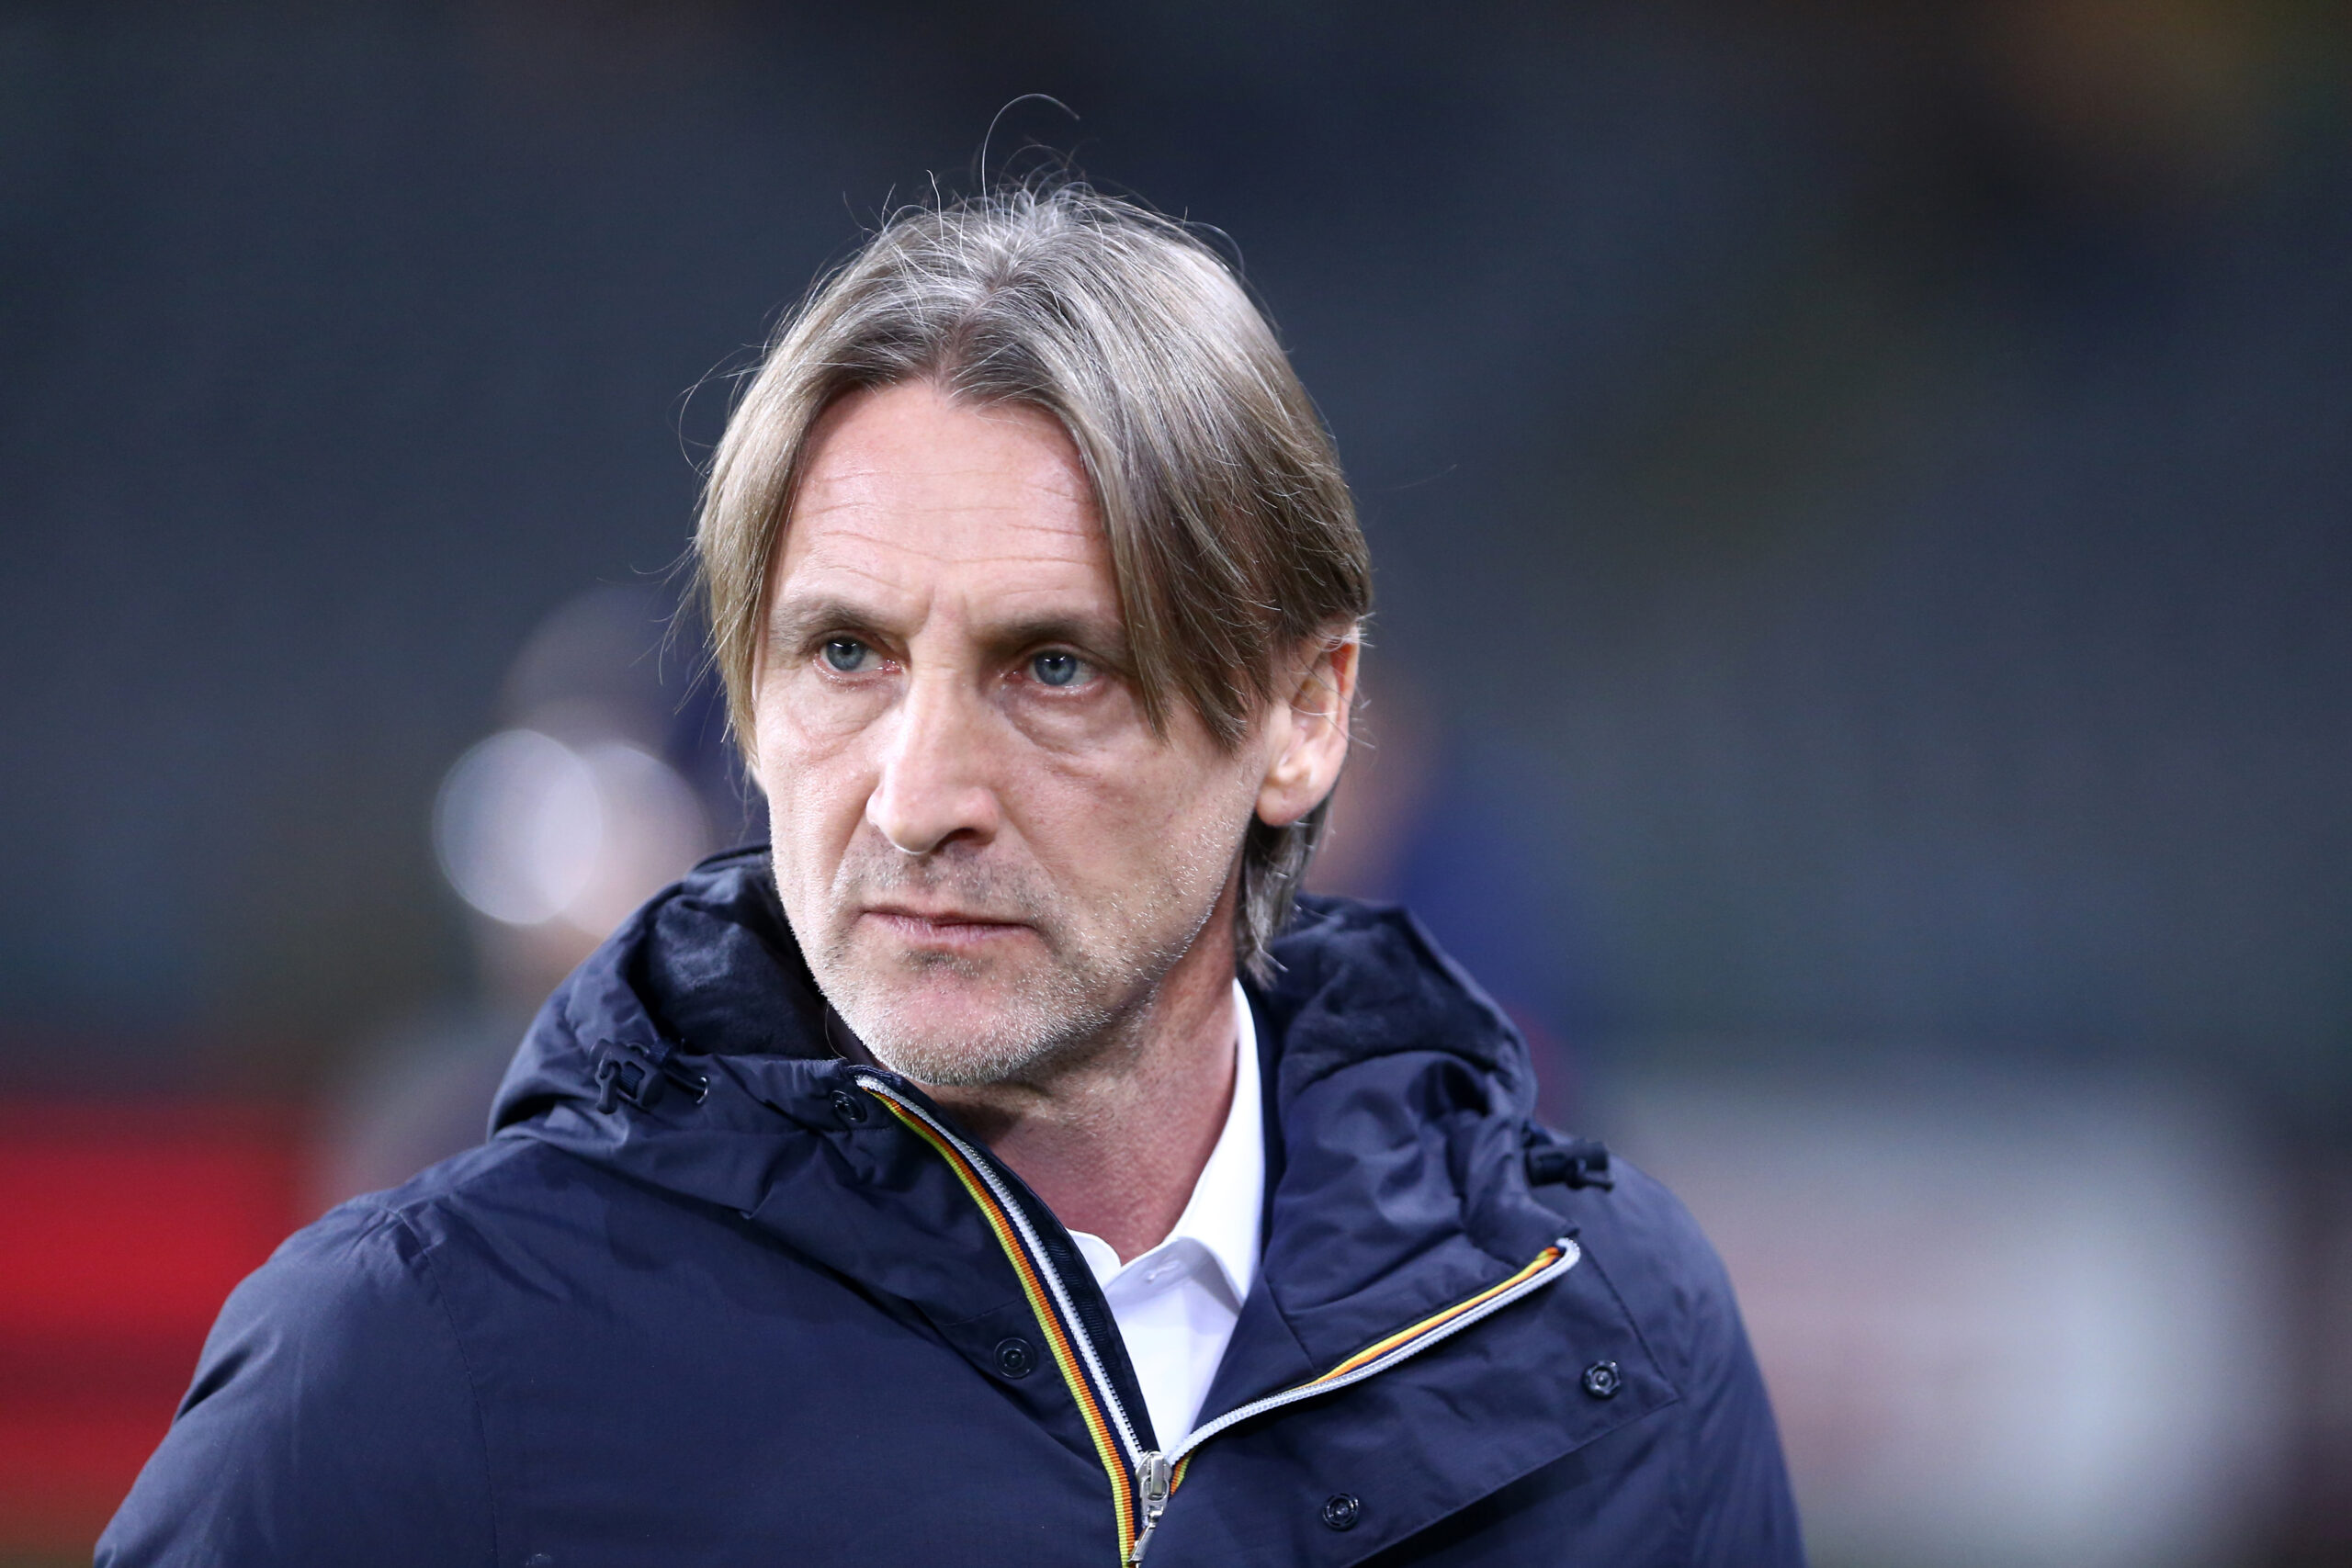 Following the costly loss to Verona and other poor results, Empoli have sacked Aurelio Andreazzoli and turned to Davide Nicola.